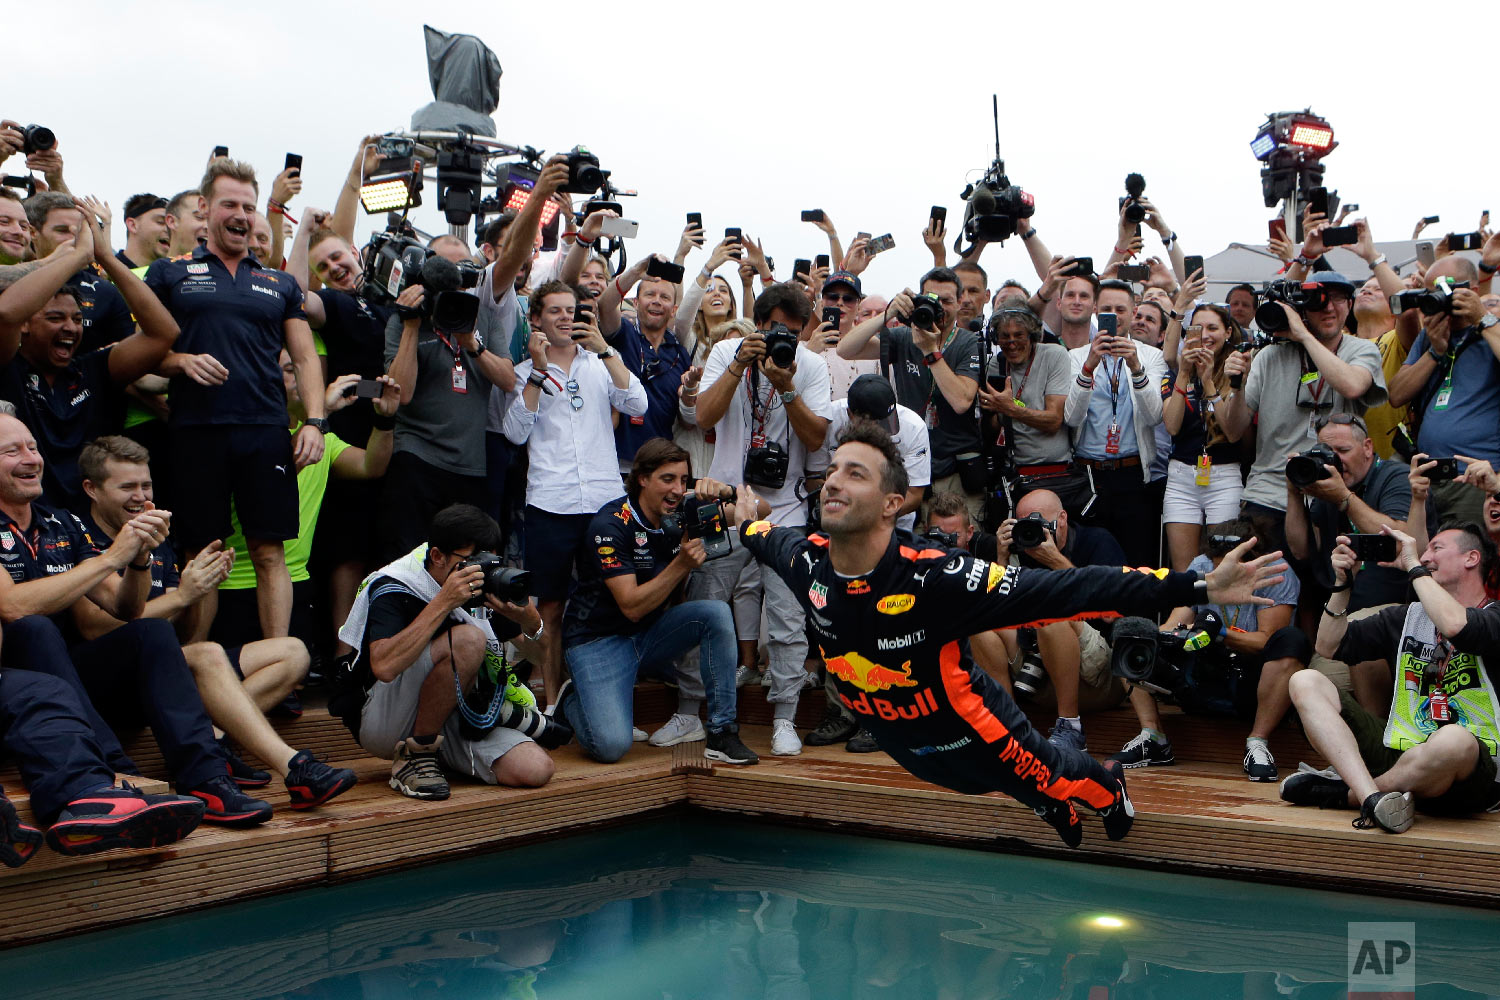  Red Bull driver Daniel Ricciardo of Australia, center, dives into a pool with his team after winning the Formula One race, at the Monaco racetrack, in Monaco on May 27, 2018. (AP Photo/Claude Paris) 